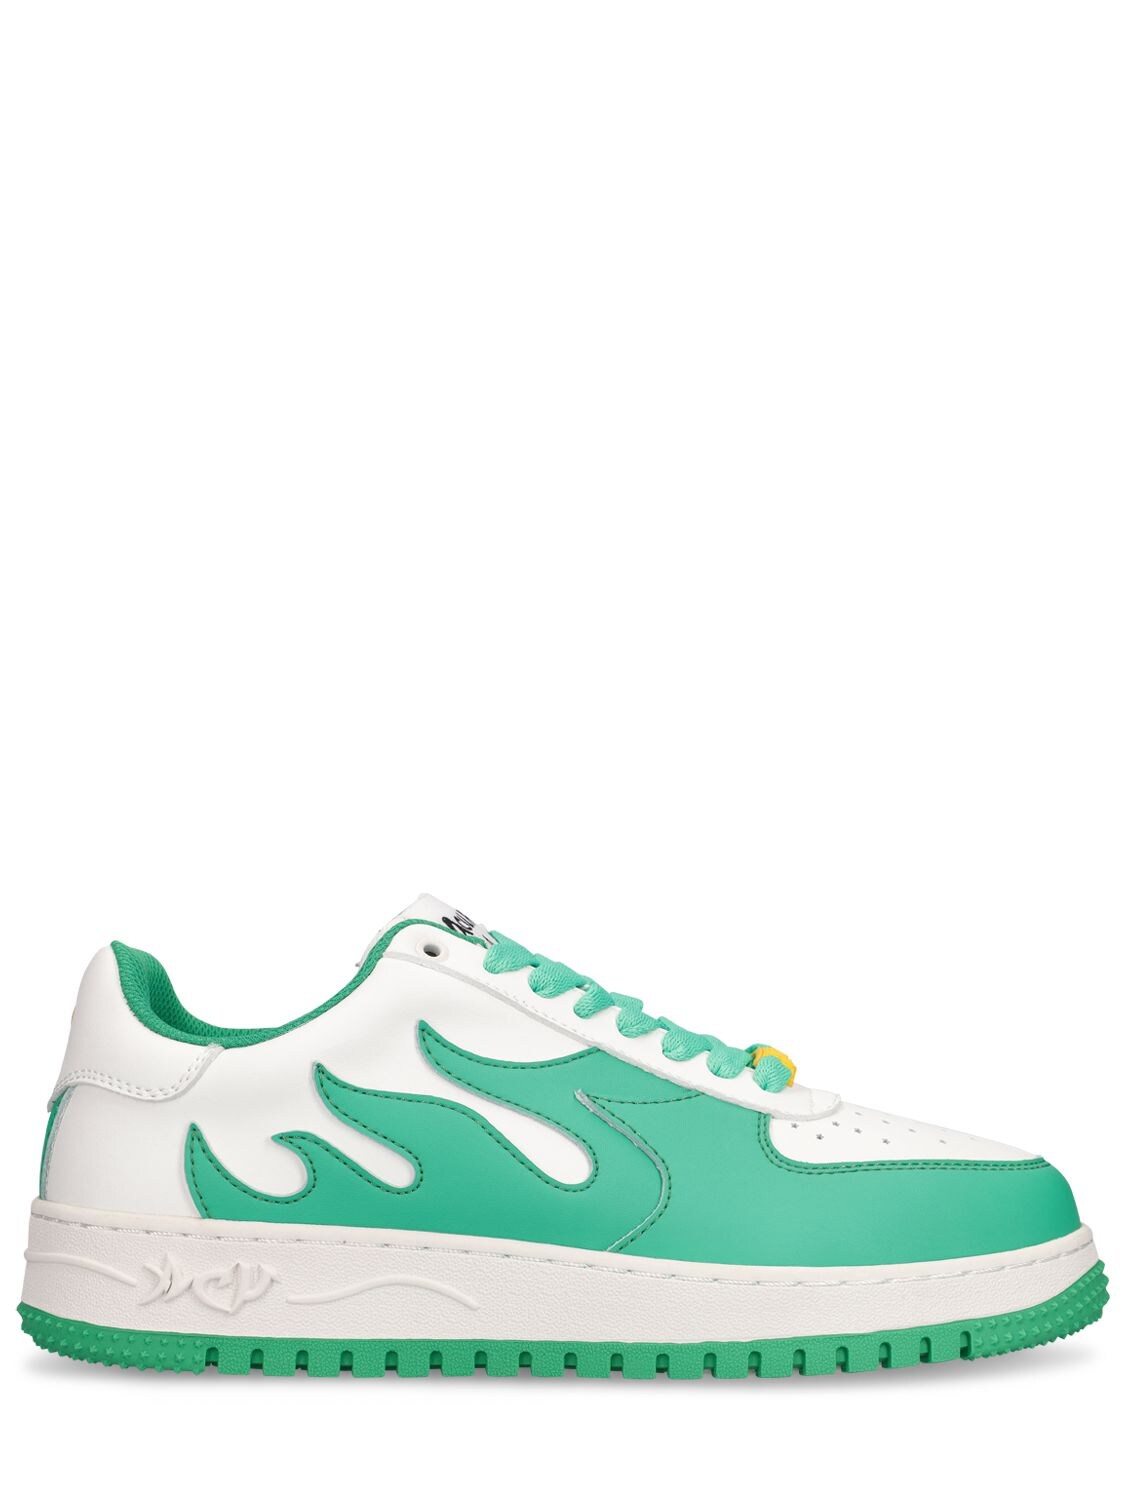 Acupuncture Acu Force Flame Sneakers In White,green